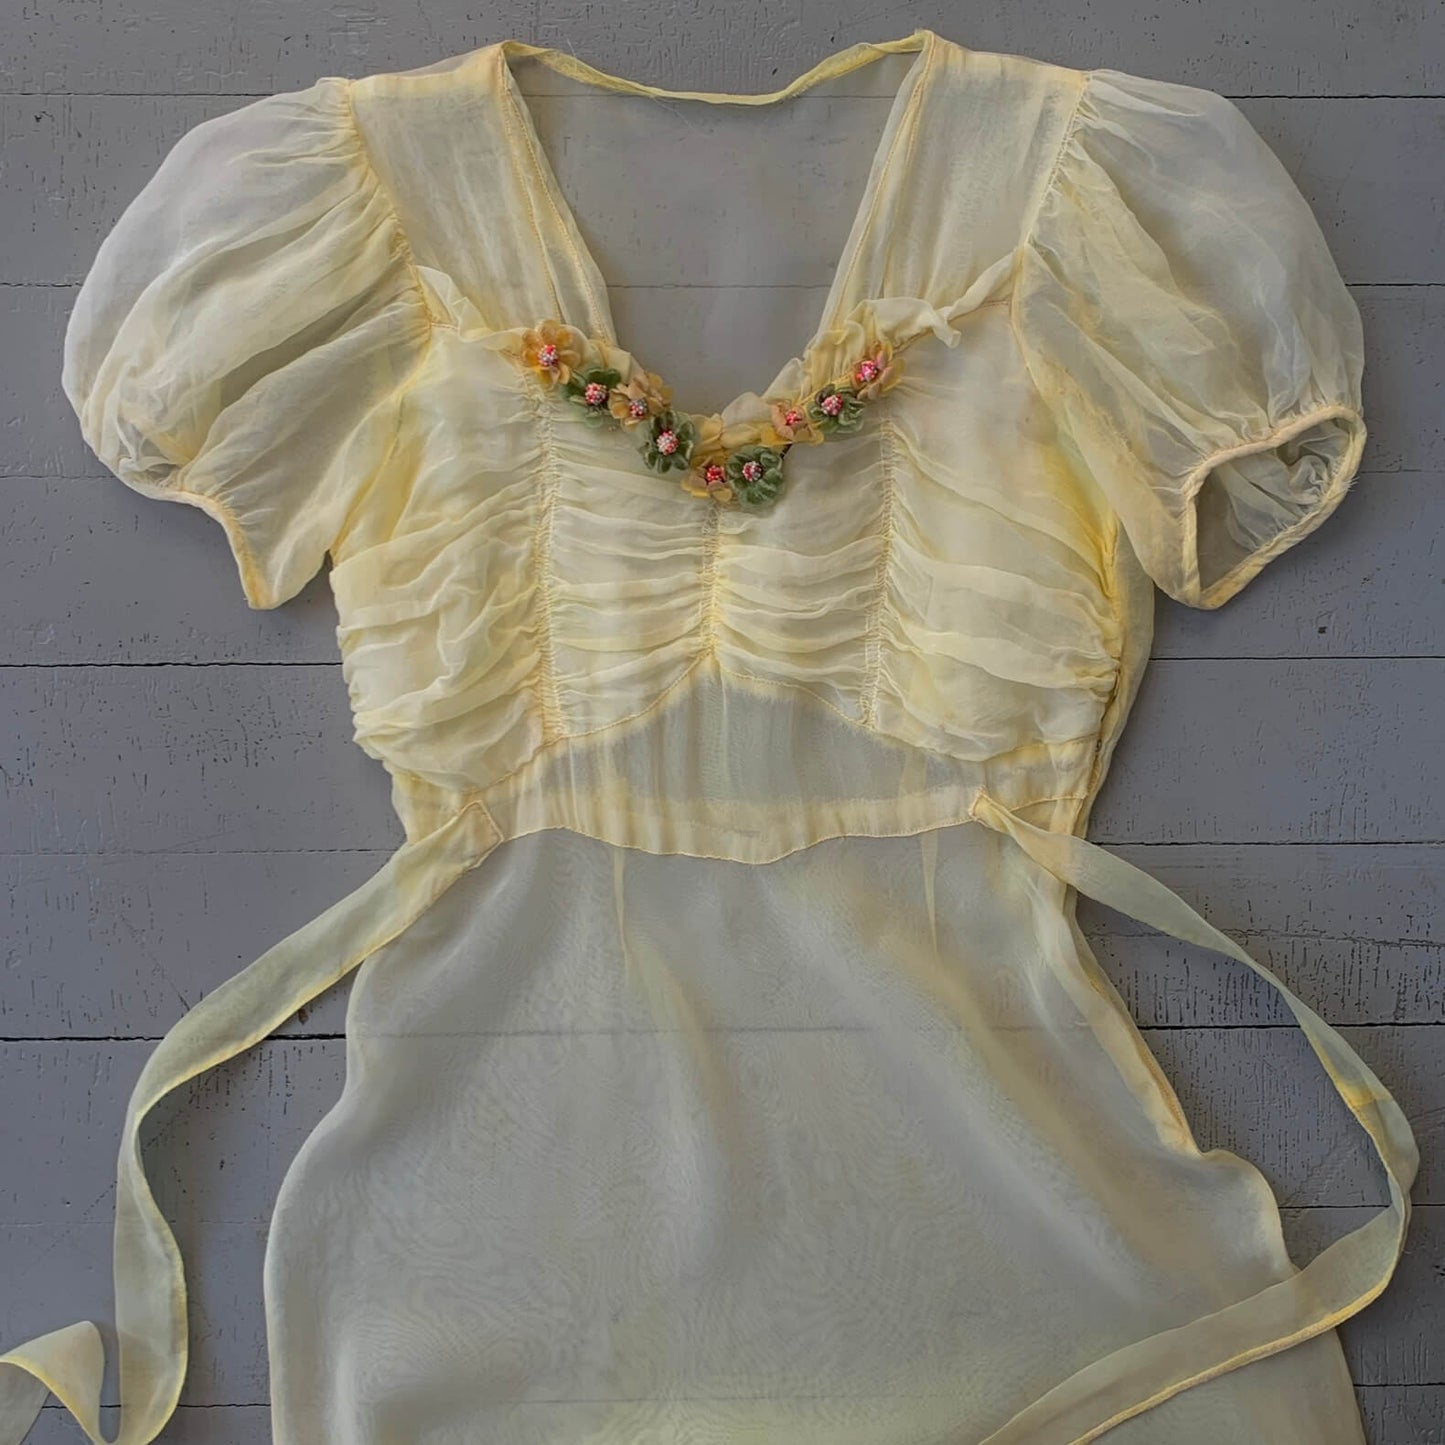 yellow 1930s sheer gown with floral applique laid flat